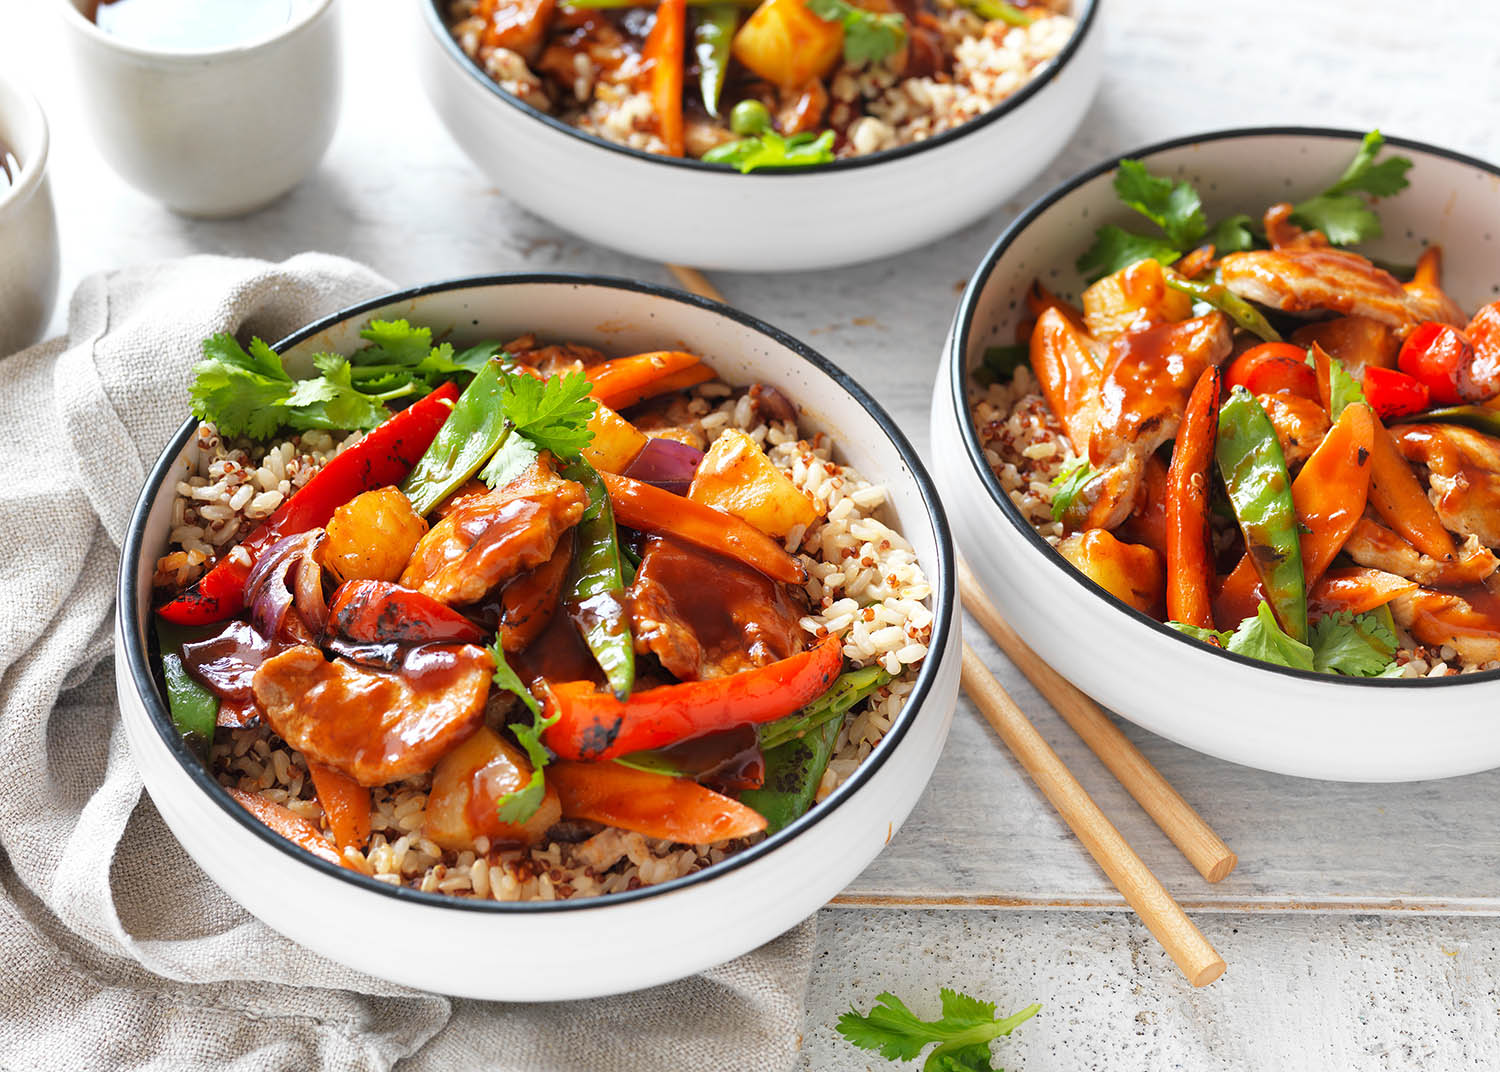 Sweet and sour pork by celebrate health